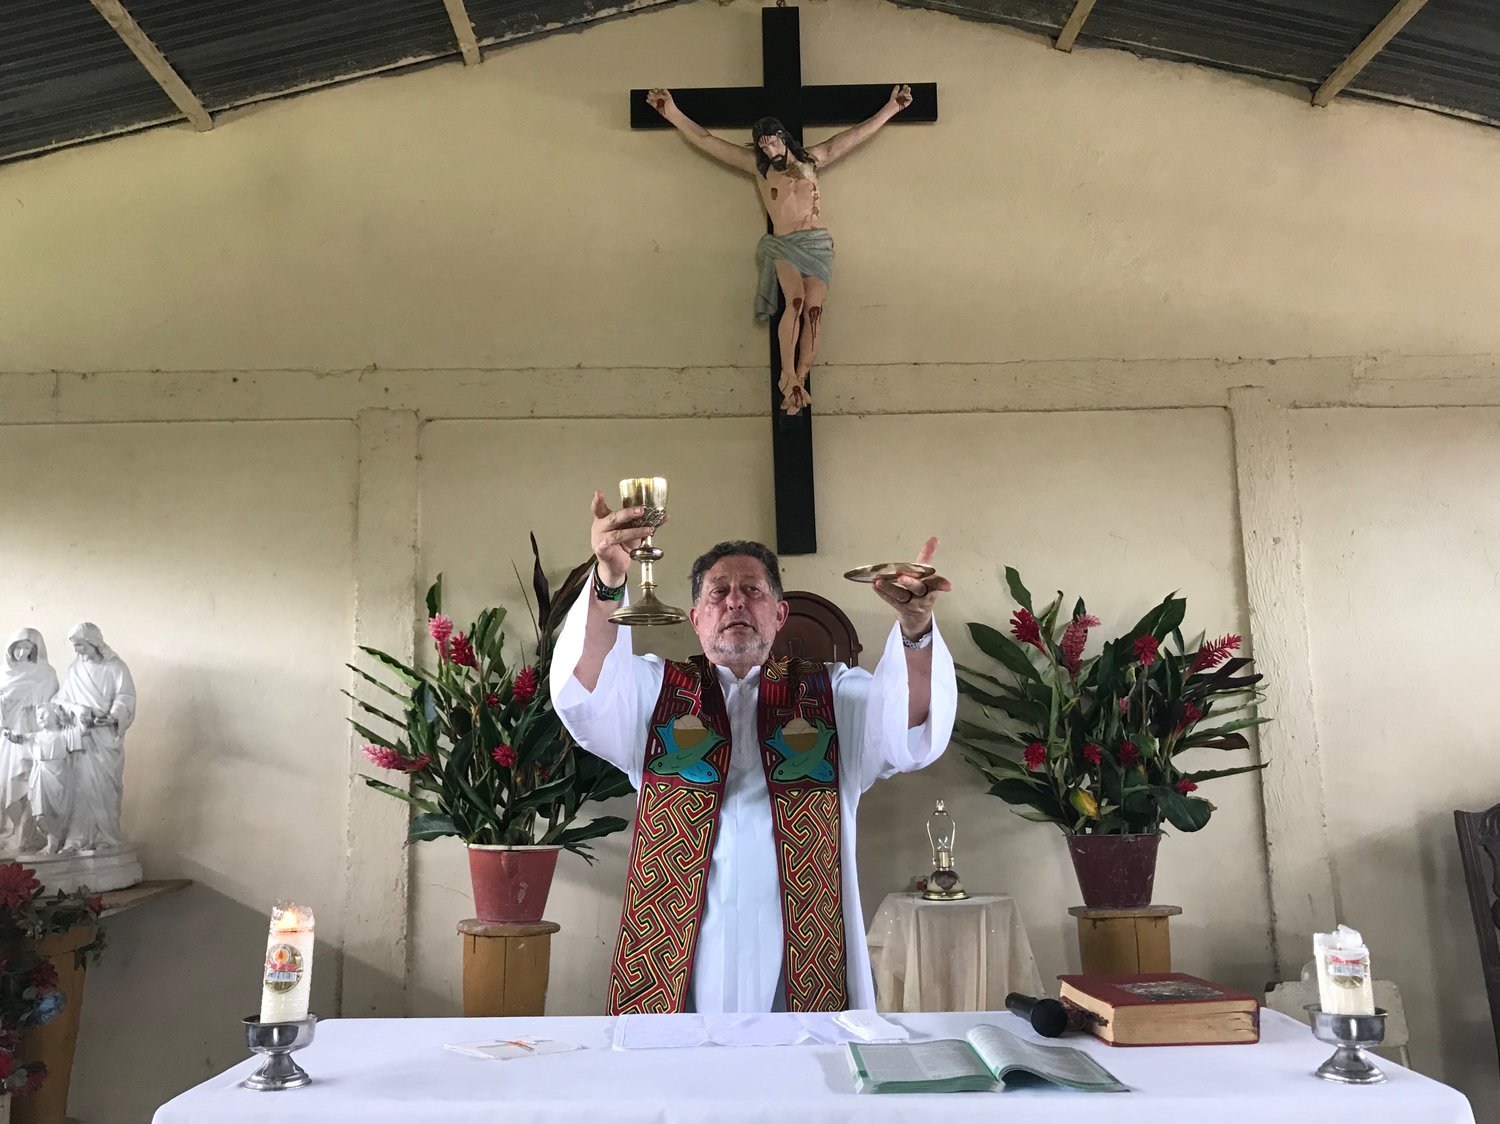 Jesuit Father Alfredo Ferro celebrates Mass July 14, 2019, in the indigenous community of Nazaret, Colombia. In Pope Francis’ postsynodal apostolic exhortation, “Querida Amazonia,” released Feb. 12, 2020, the Pontiff acknowledged the serious shortage of priests in remote areas of the Amazon, but he insisted not all avenues have been exhausted to address the issue.